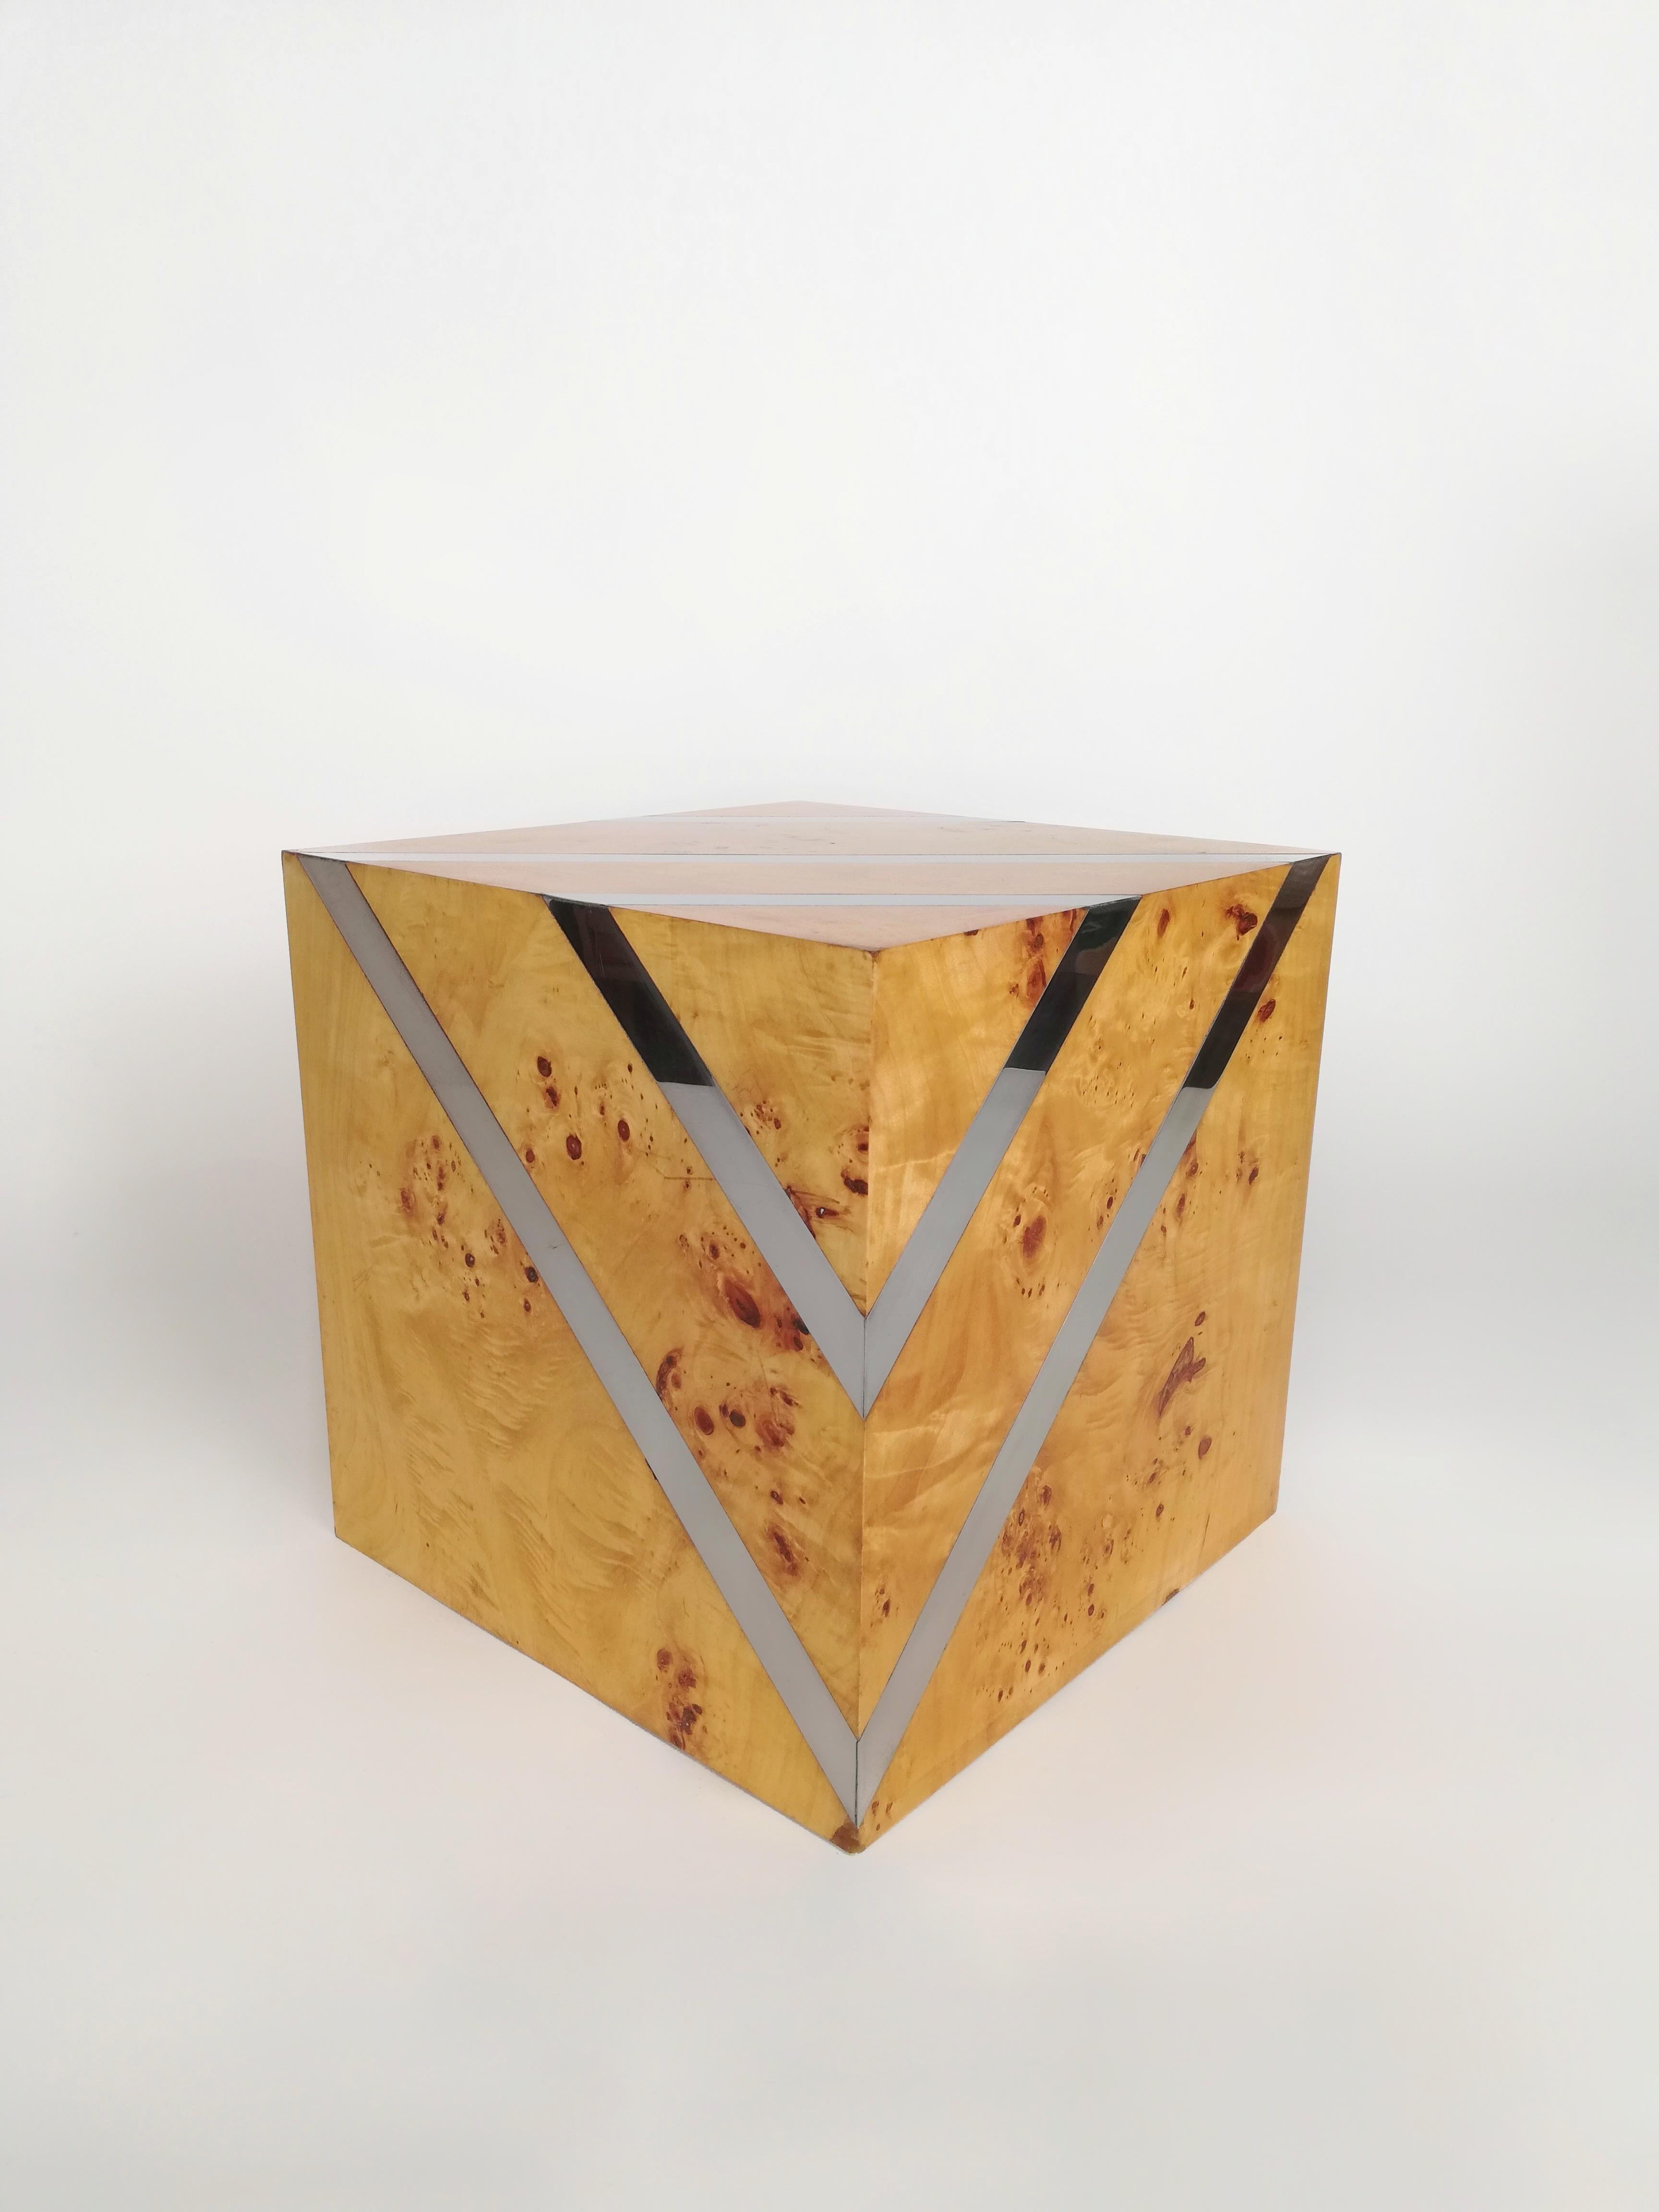 Small cube to be used as a pedestal or as a support table near a seat.
His dating is unmistakable, since manifesto of that 70s taste that brought back the use of the burl by combining it with sparkling materials such as steel or brass.
The smooth